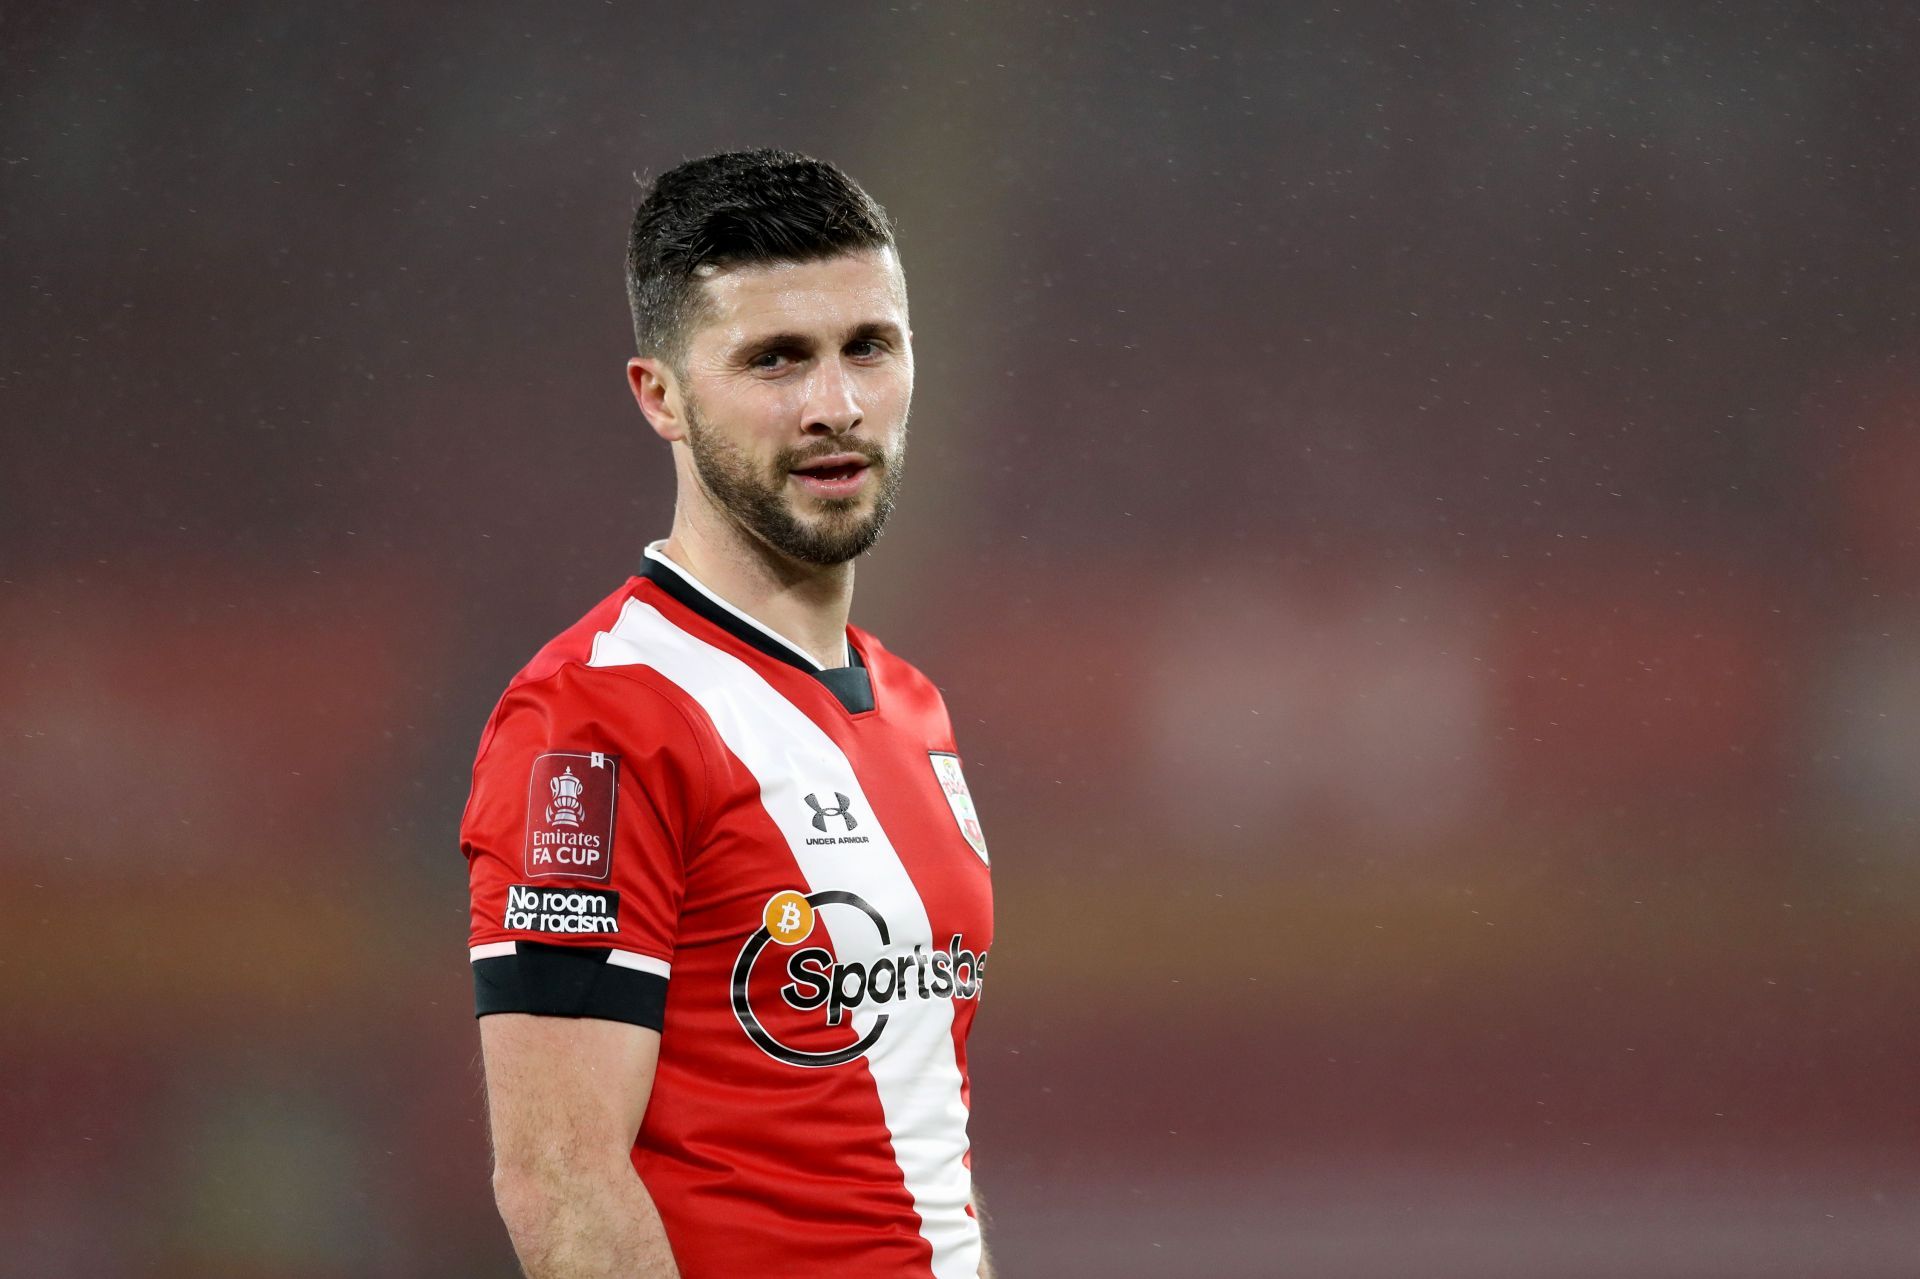 Shane Long has only made one appearance in the Premier League this season